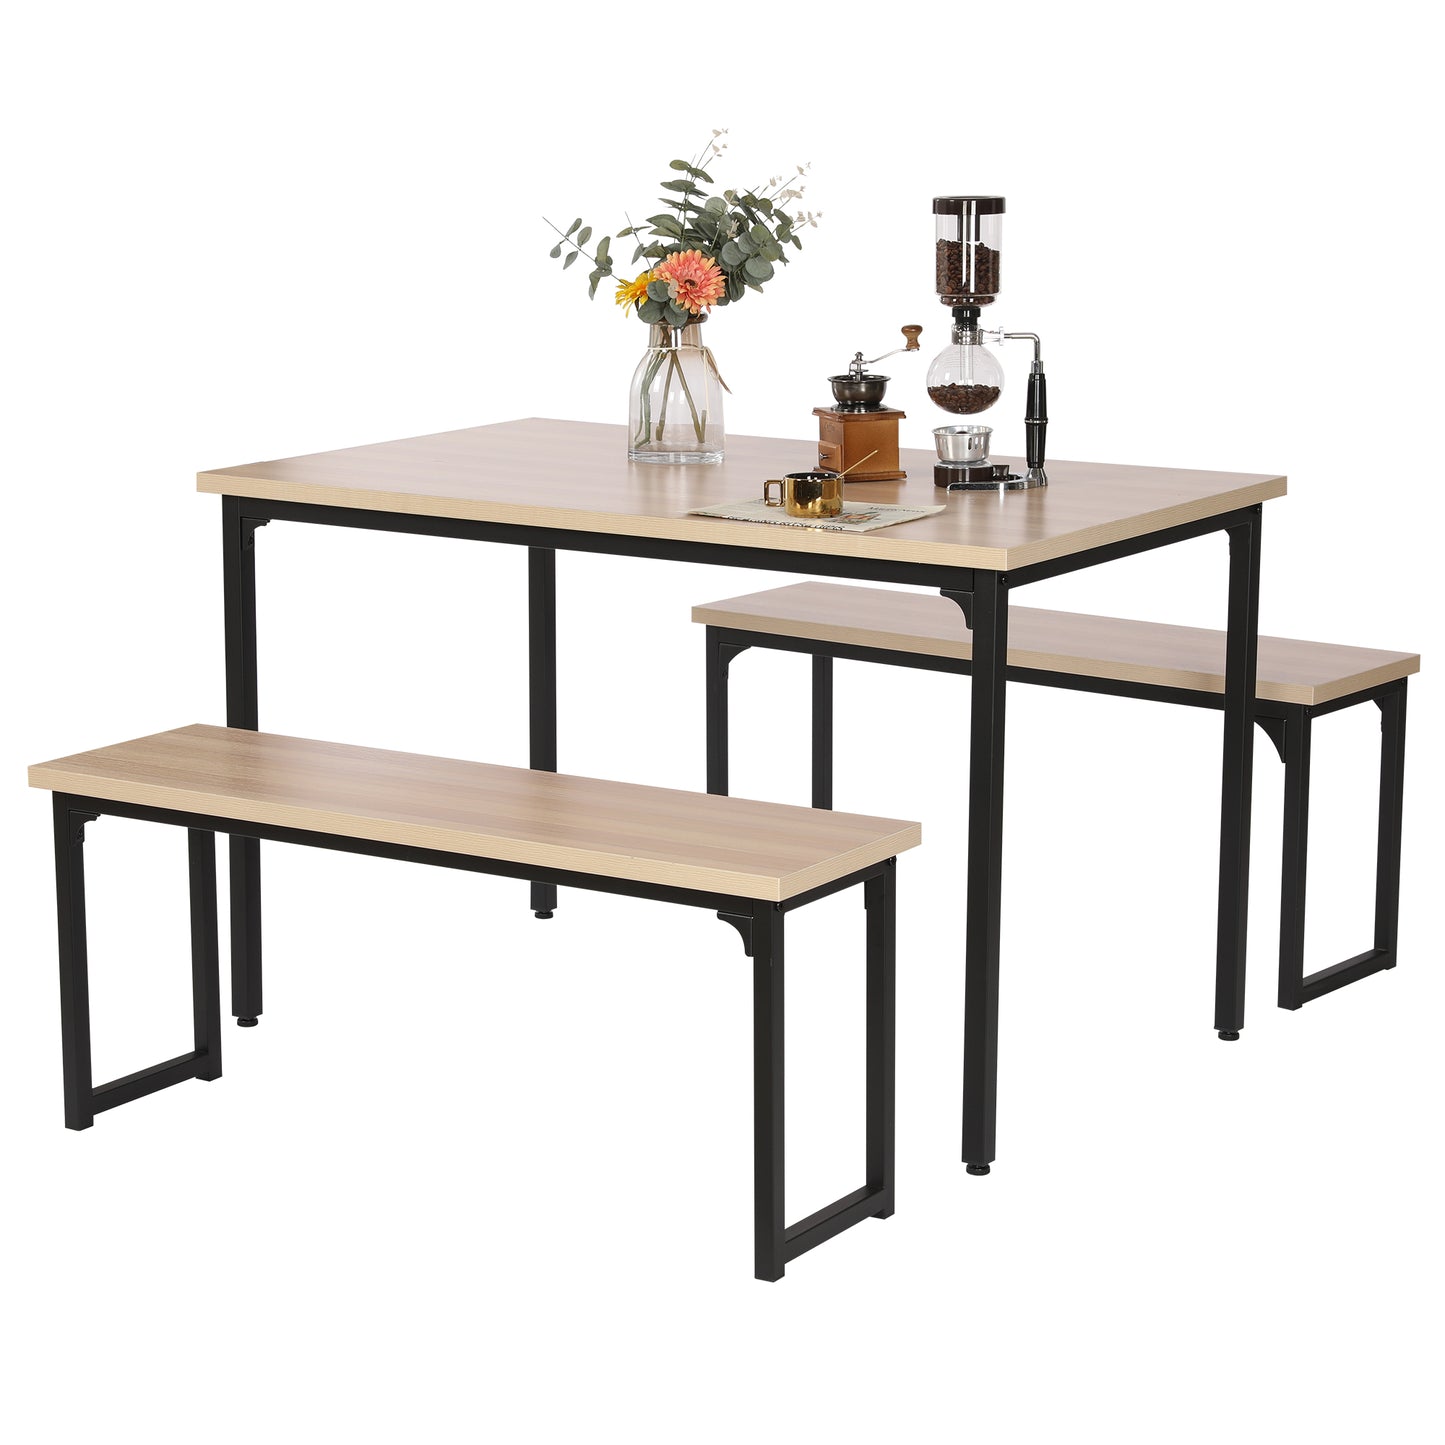 3-Piece Dining Table Set with 2 Benches, Modern Home Kitchen Table and Chairs for Dining Room, Restaurant, Apartment, Studio, Breakfast Nook, Pub, Kitchen Table Set Study Writing Desk, Beige